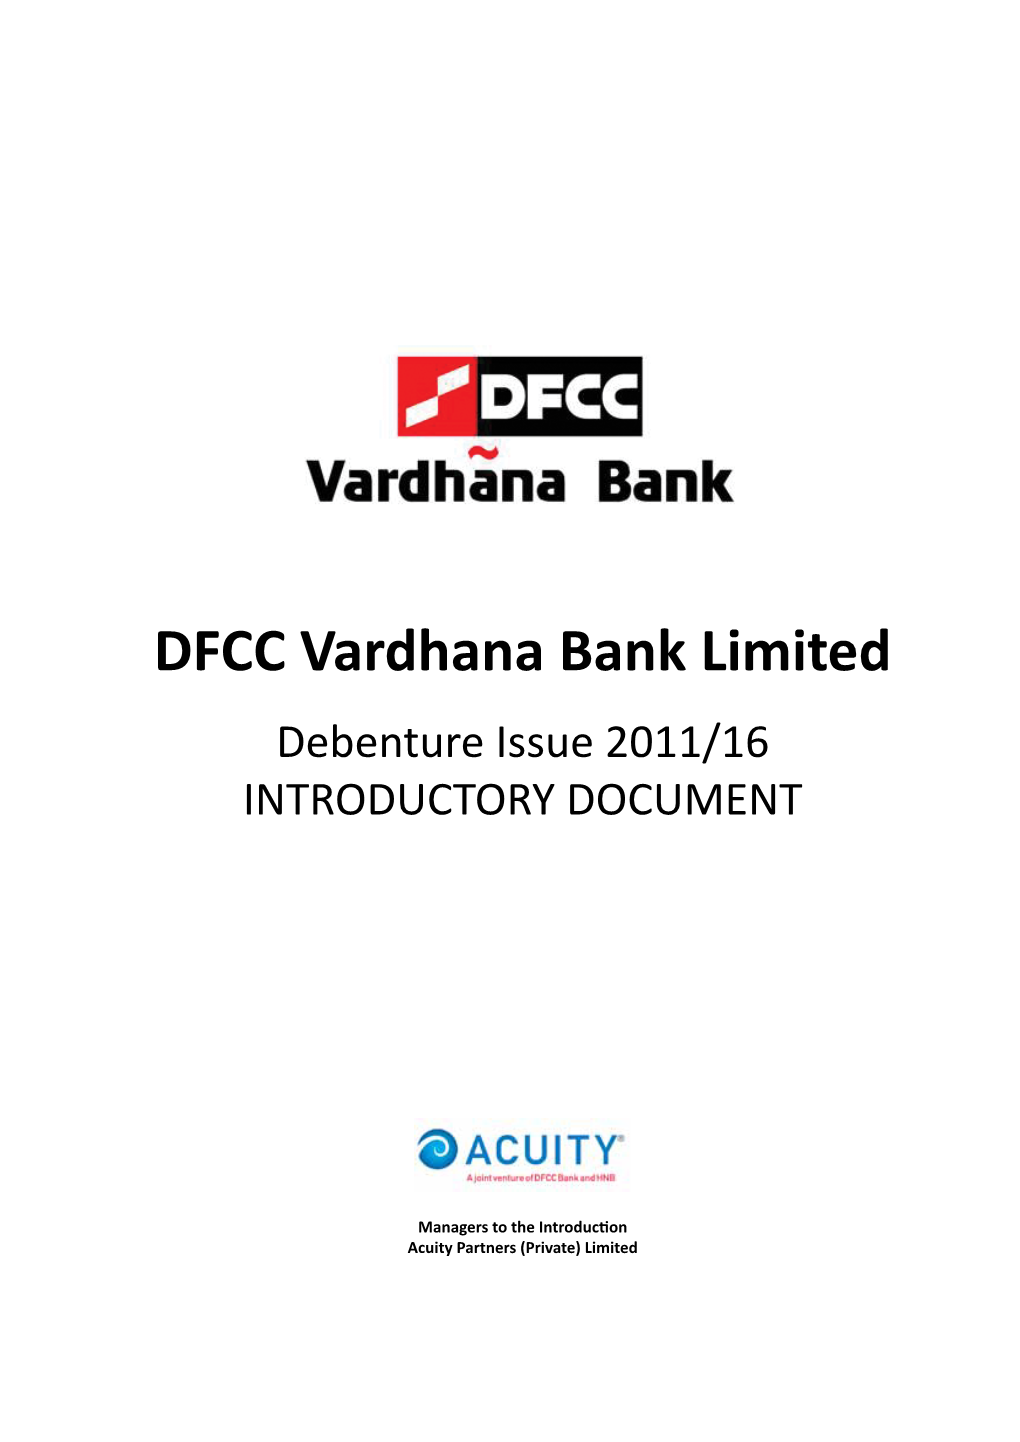 DFCC Vardhana Bank Limited Debenture Issue 2011/16 INTRODUCTORY DOCUMENT